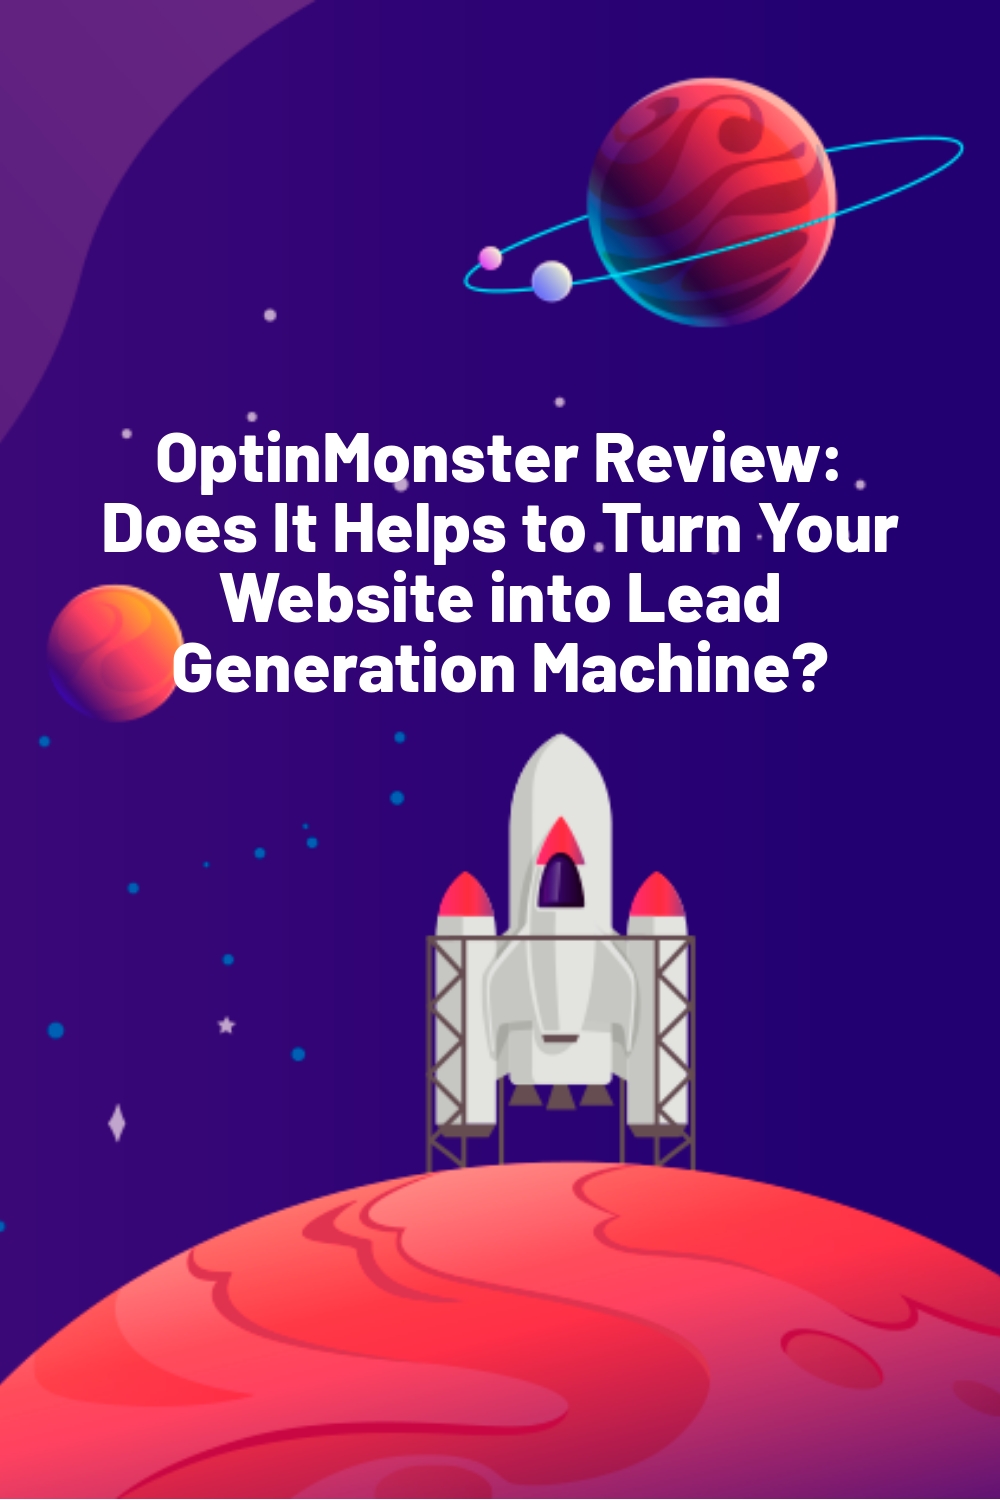 OptinMonster Review: Does It Helps to Turn Your Website into Lead Generation Machine?